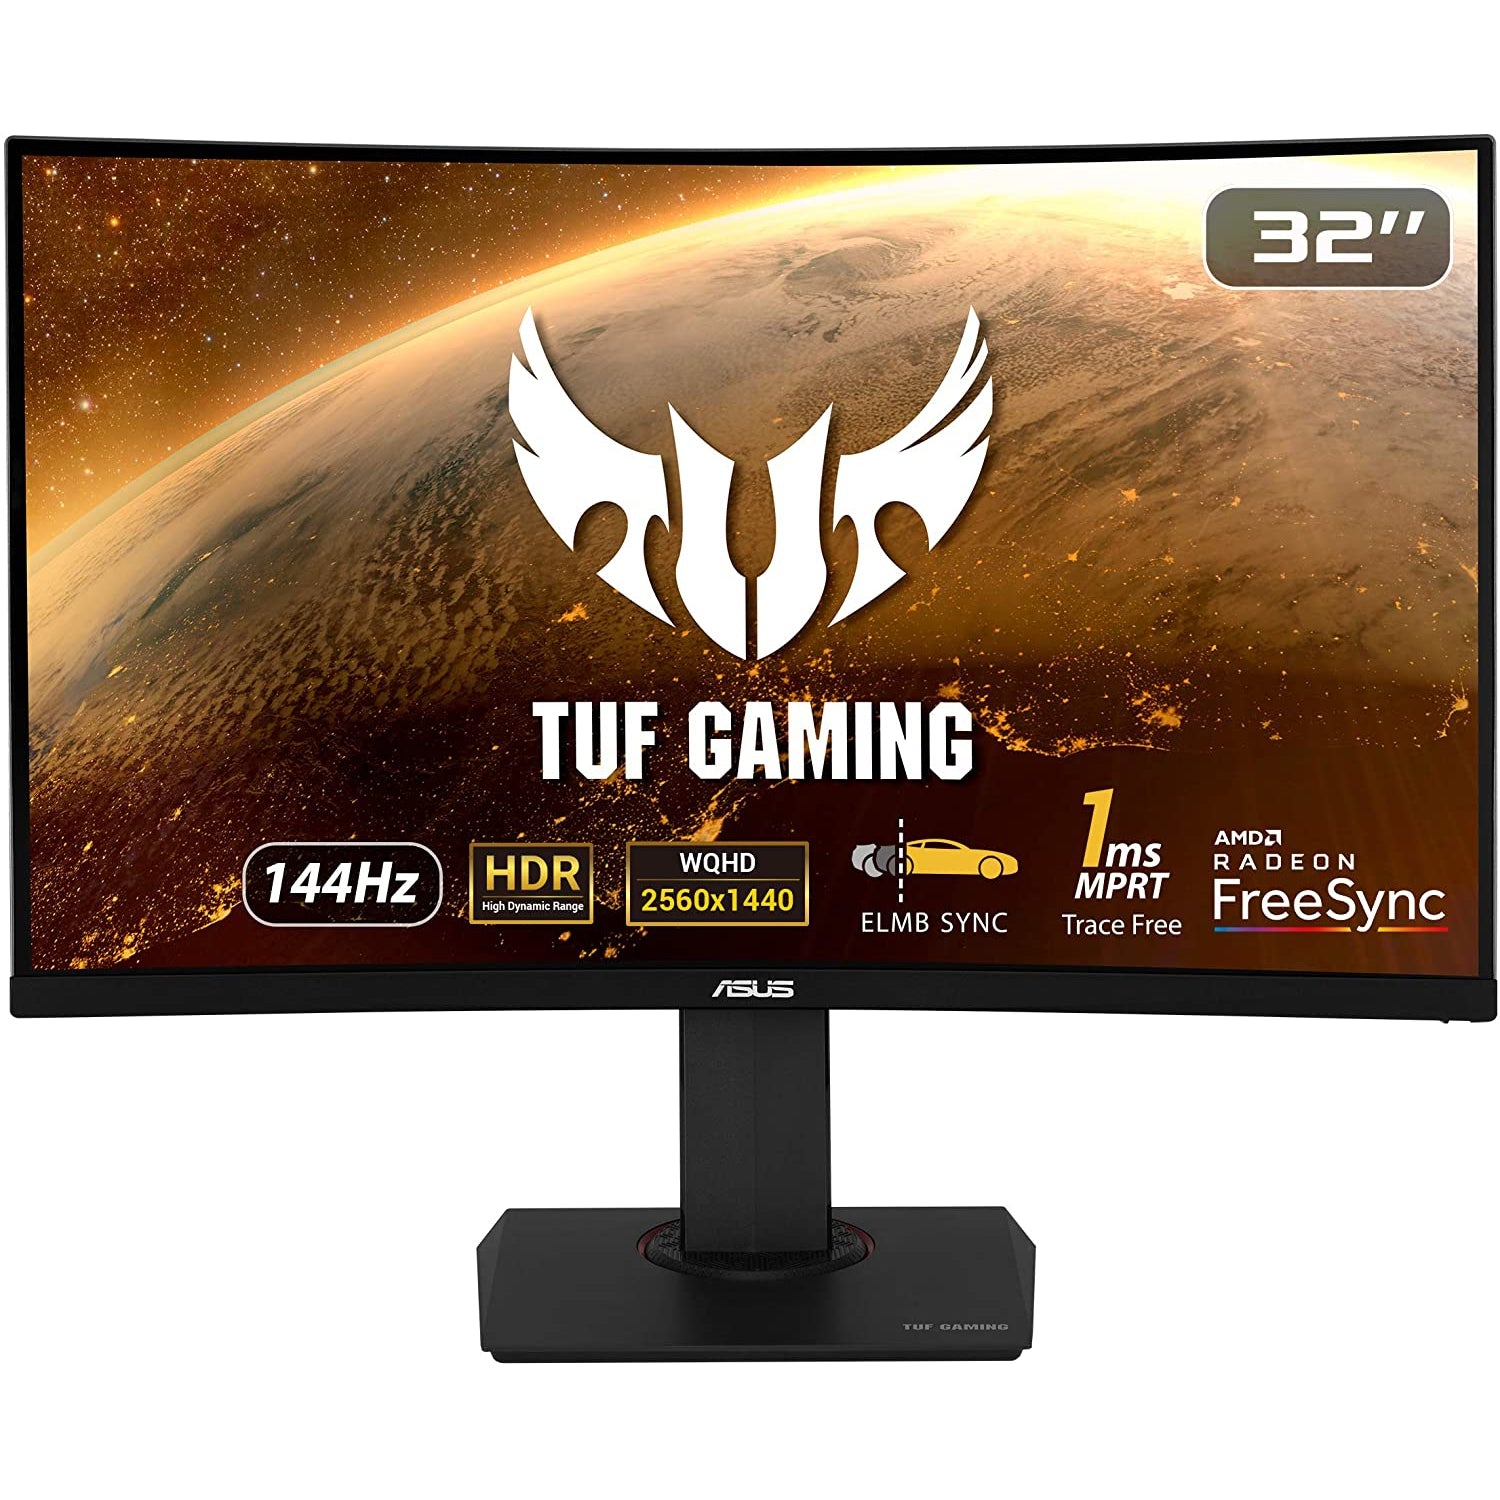 ASUS TUF Gaming VG32VQ Gaming Monitor, 32 Inch (31.5 Inch) WQHD (2560x1440), Curved VA, up to 144Hz